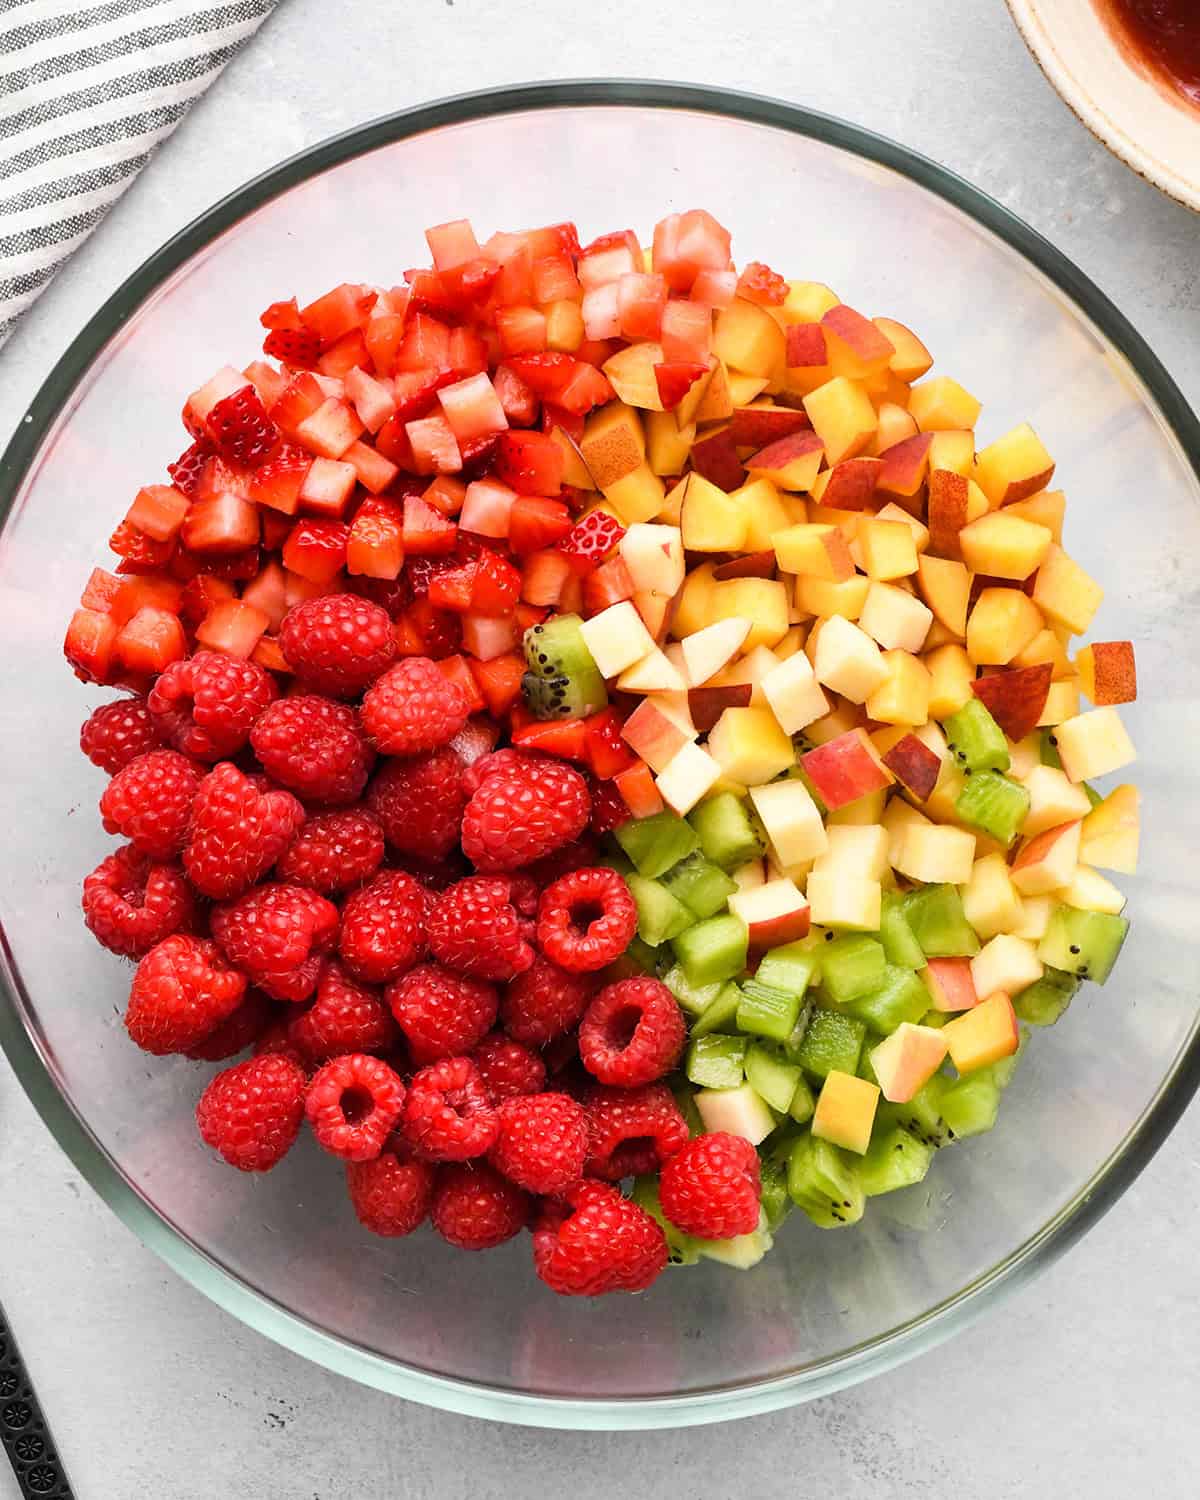 making Fruit Salsa Recipe - fruit in a bowl before mixing